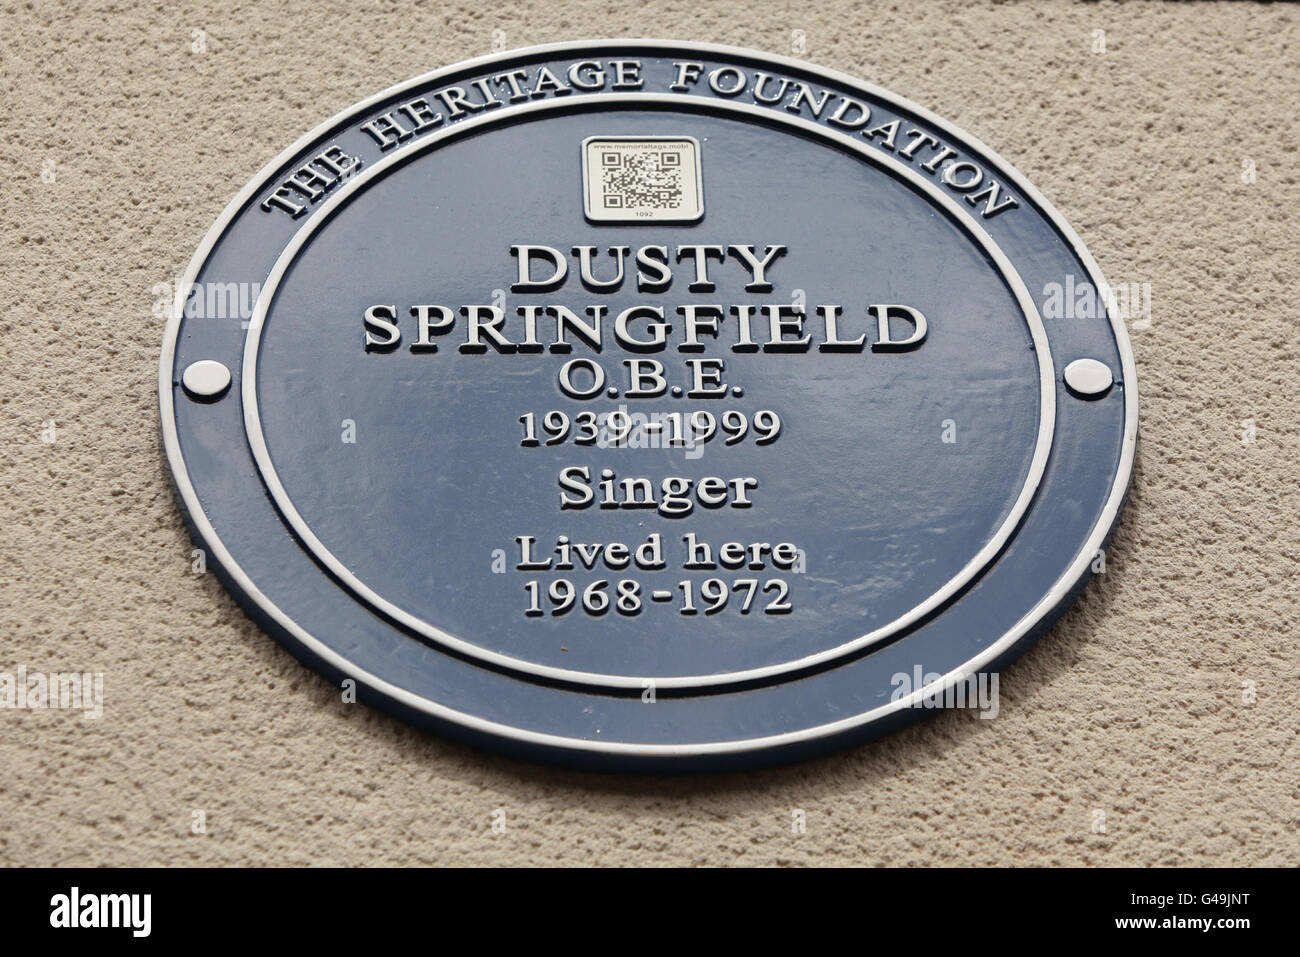 The unveiling of a Heritage Foundation blue plaque at a former home of Dusty Springfield, at 38-40 Aubrey Walk in Kensington, London. Stock Photo